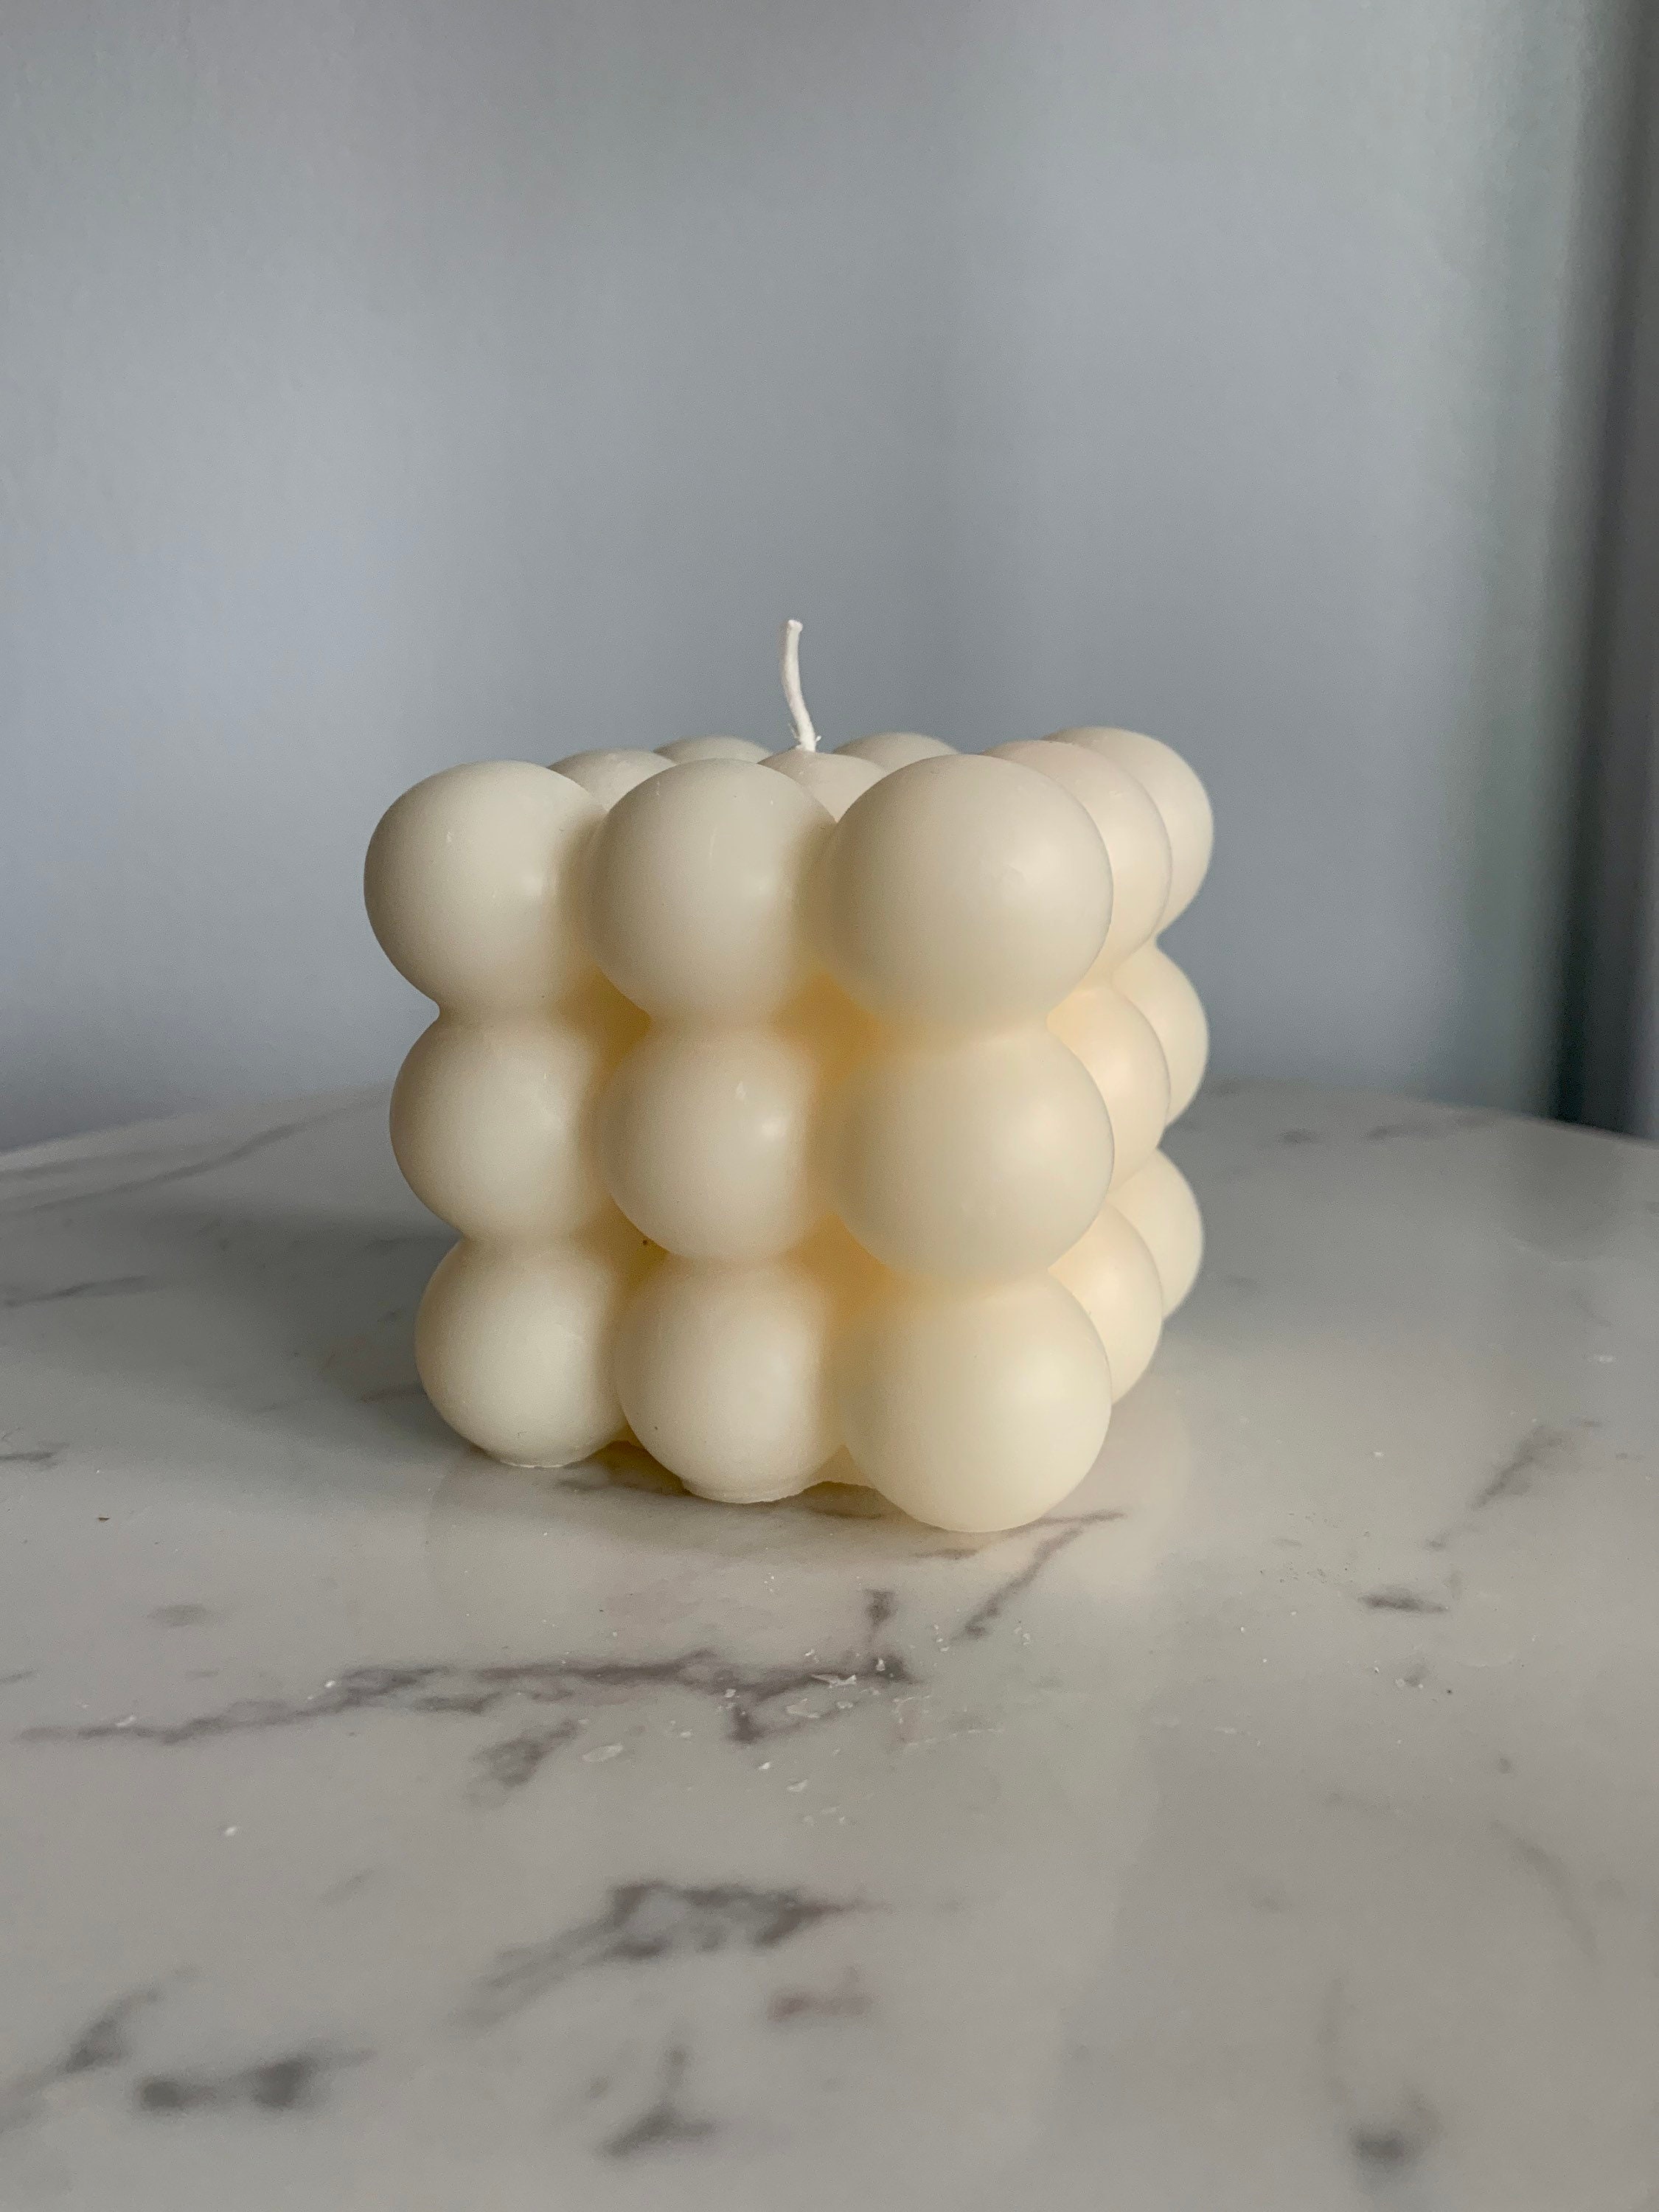 Scented Cube Candle, Bubble Candle, Cube Candle, Candle Sticks, Scented Candle, Decorative Candle, Natural Soy Wax, Housewarming Gift (White), Funny